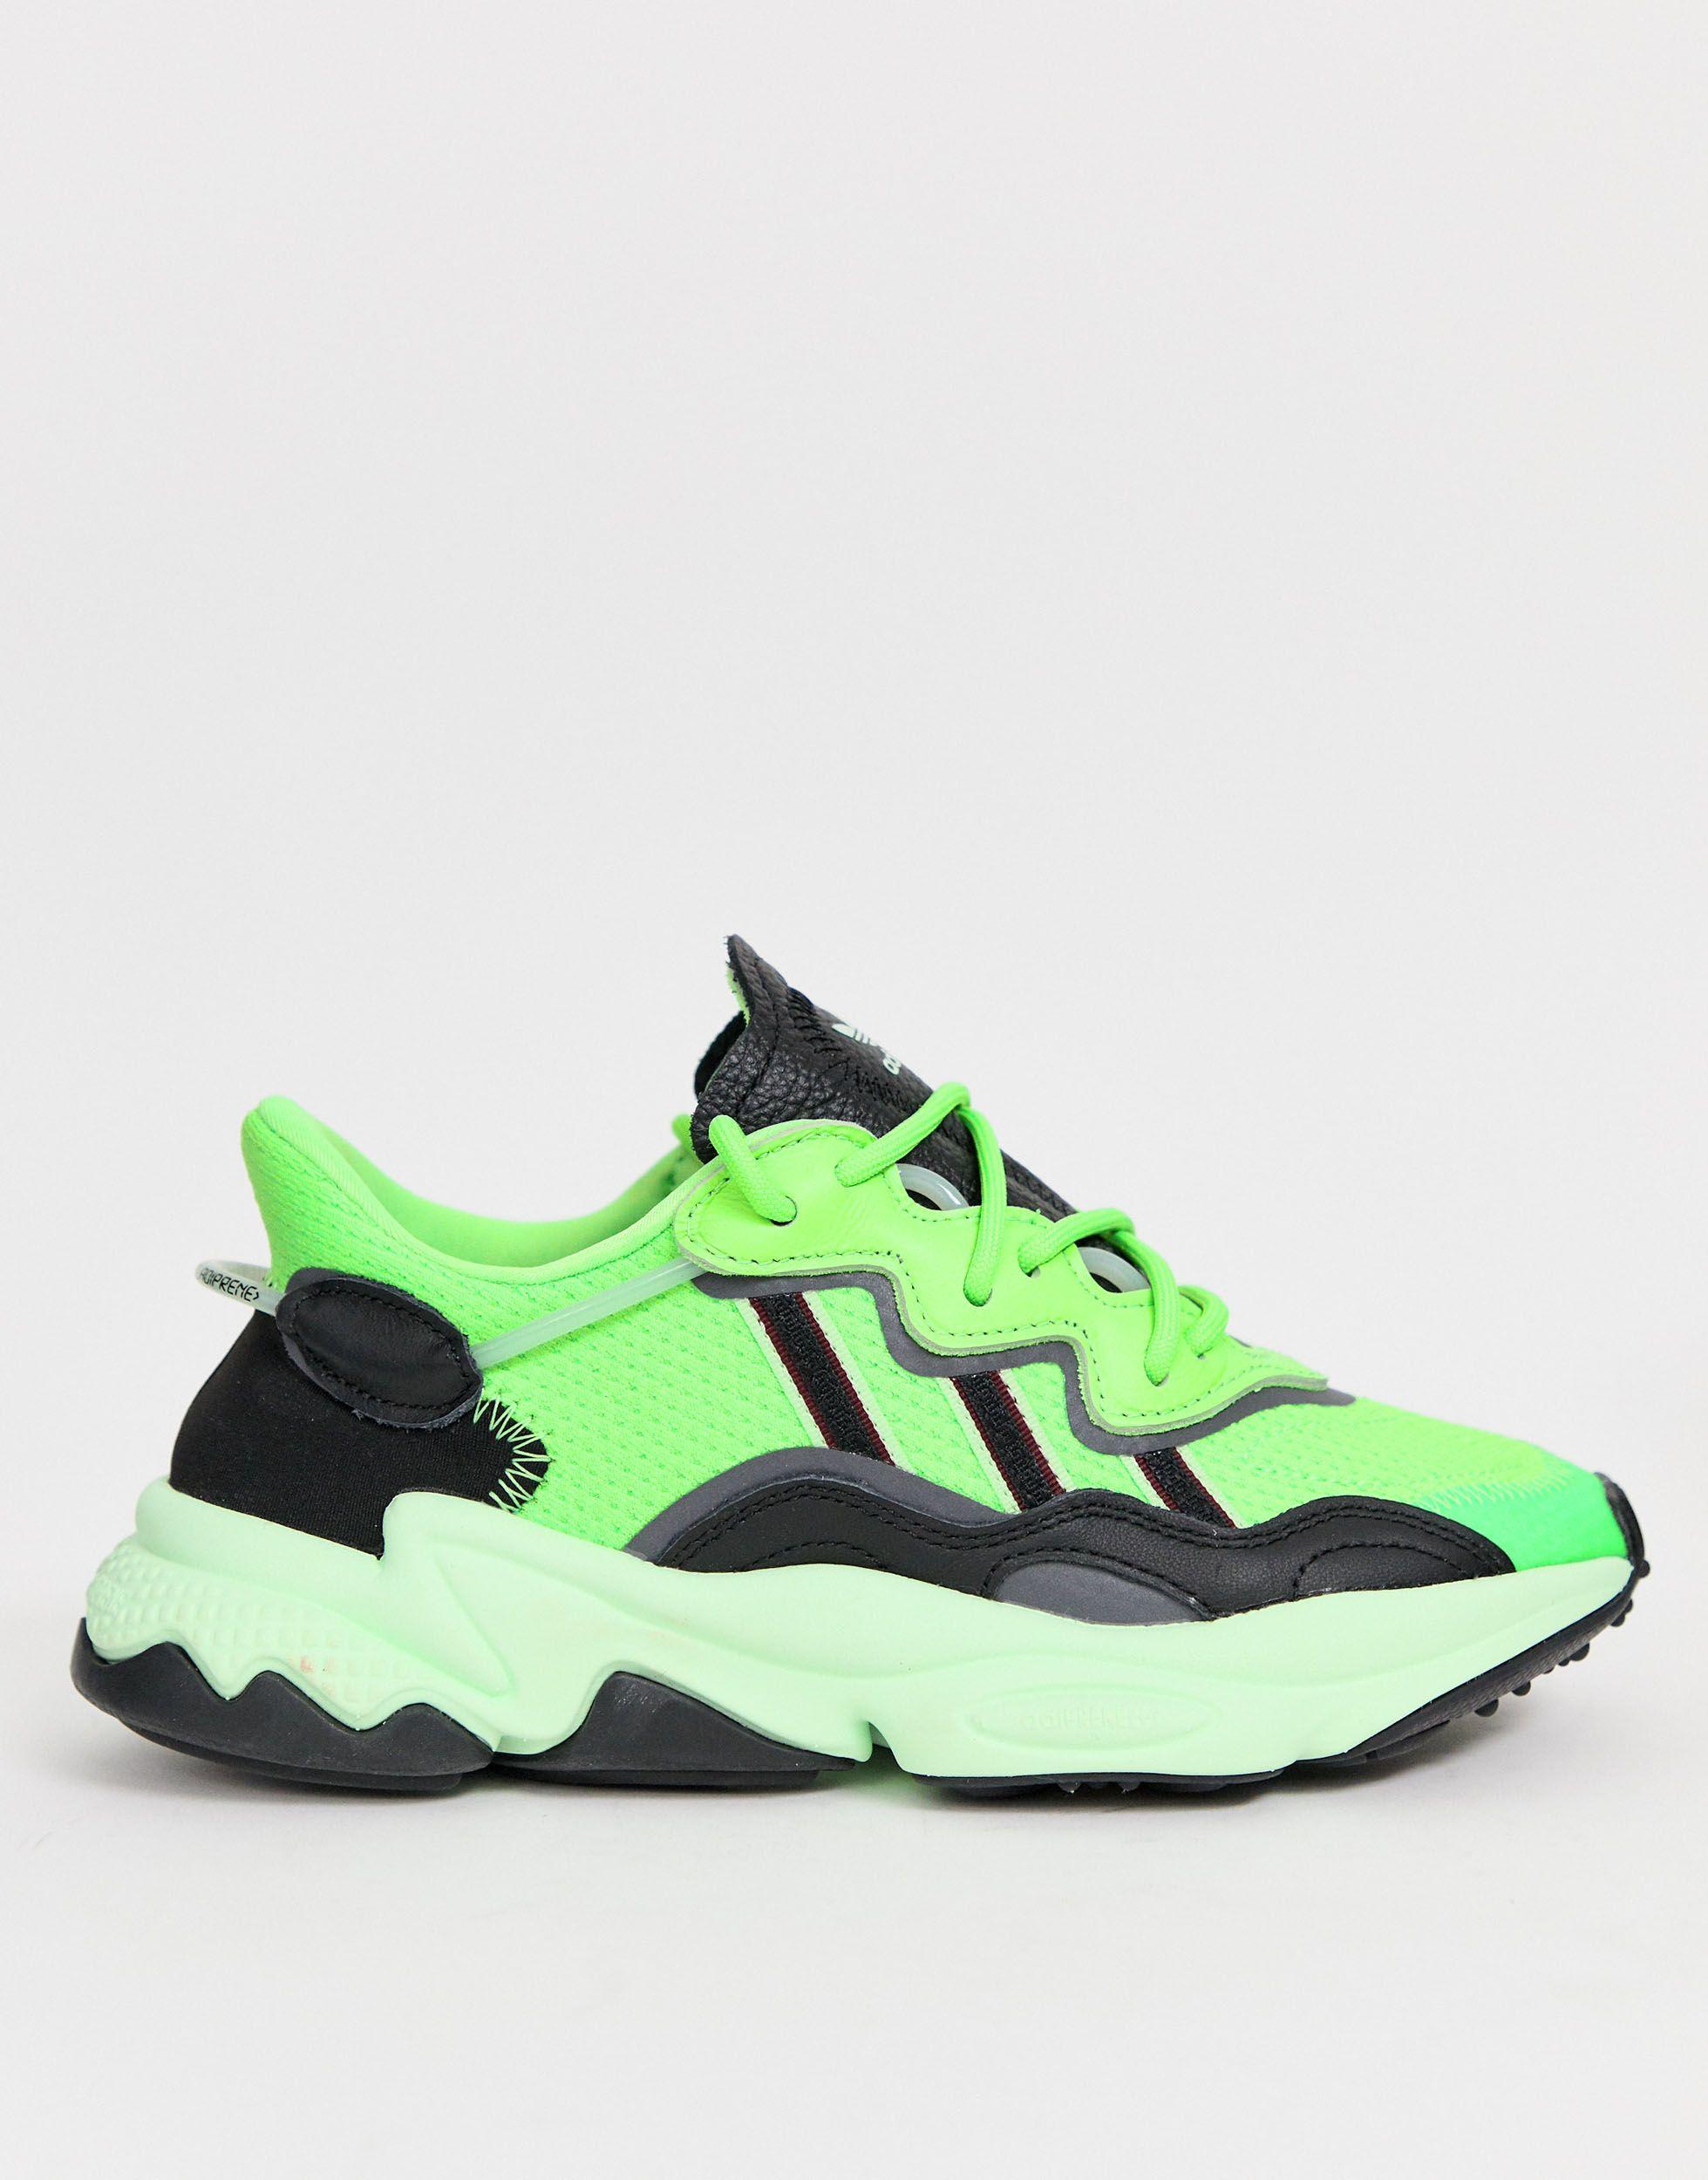 adidas Originals Rubber Ozweego Trainers in White (Green) - Lyst